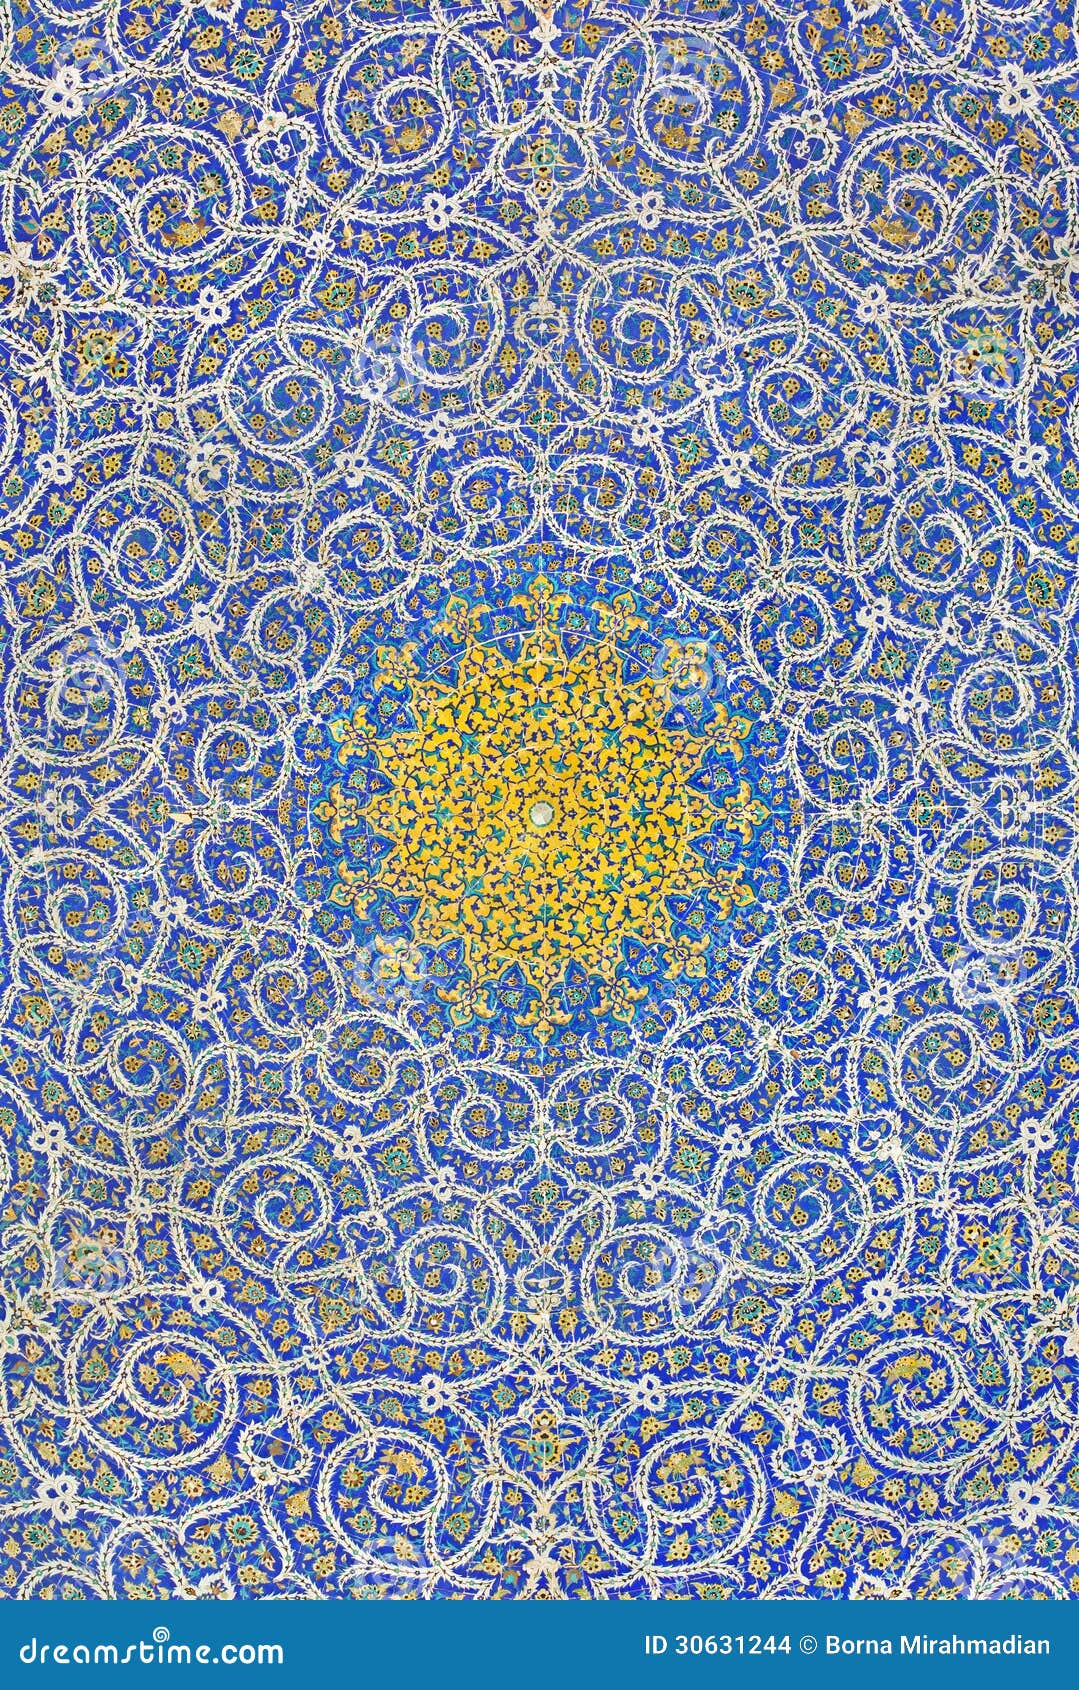  Islamic  Motif  Design On The Ceiling Of A Mosque Stock 